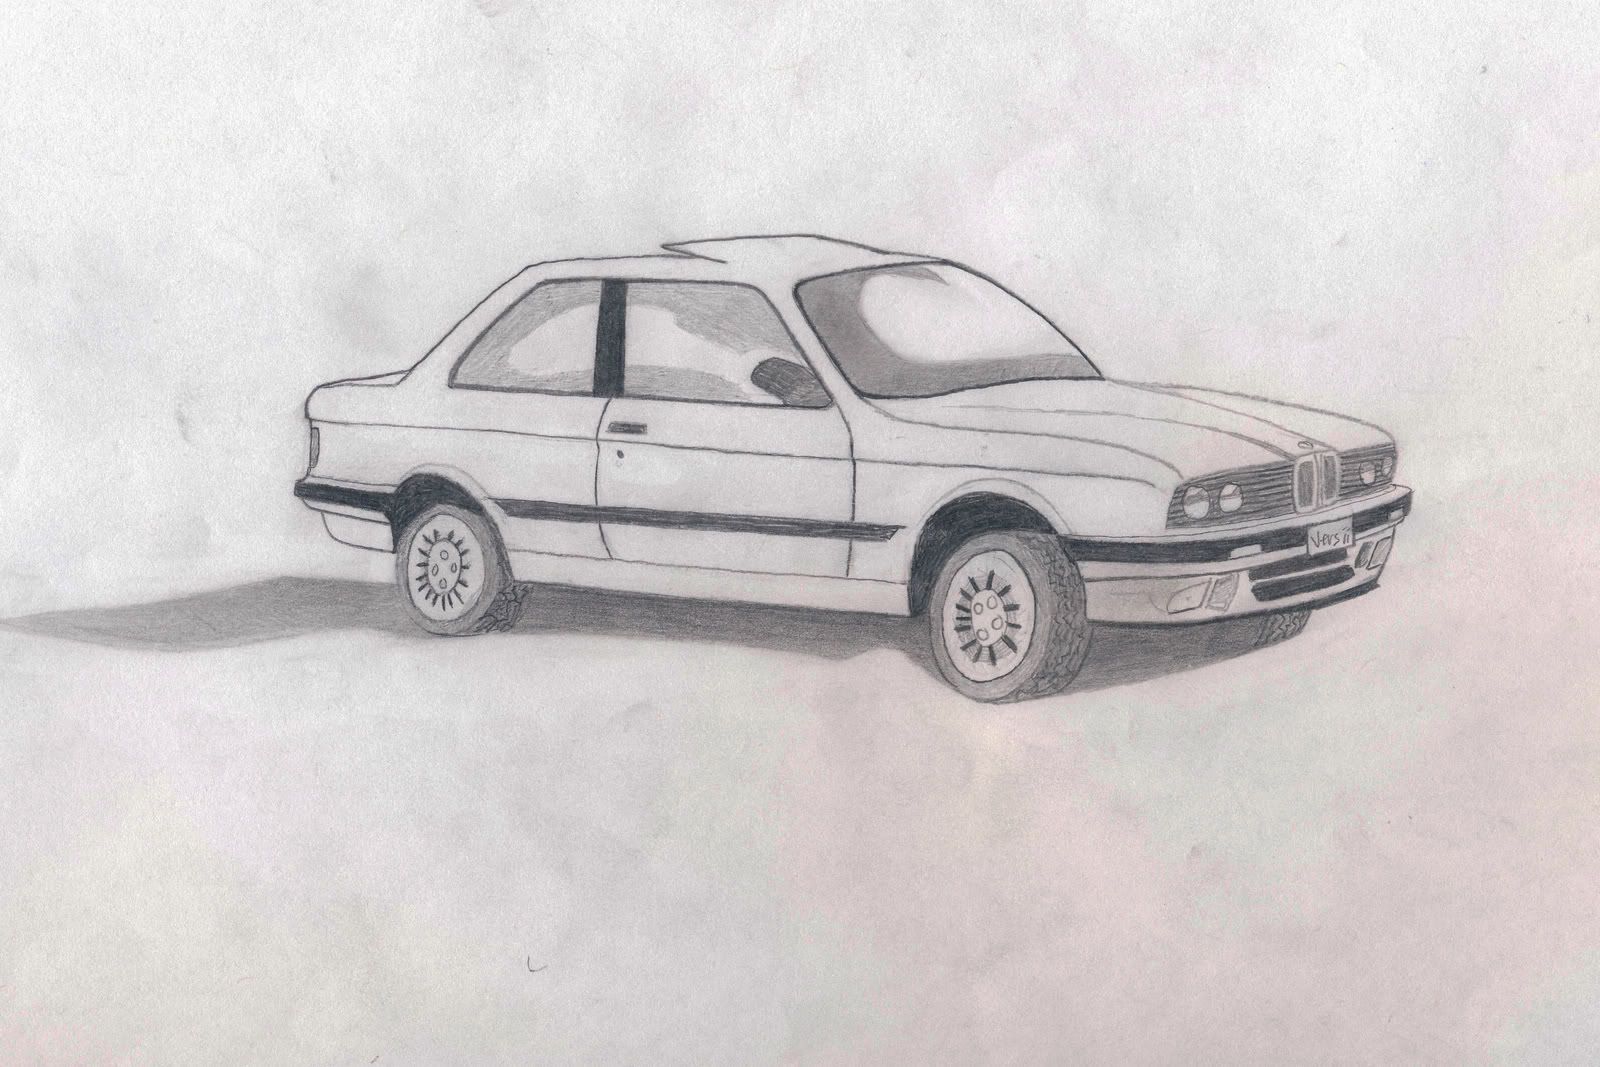 How to draw a bmw 325is #4